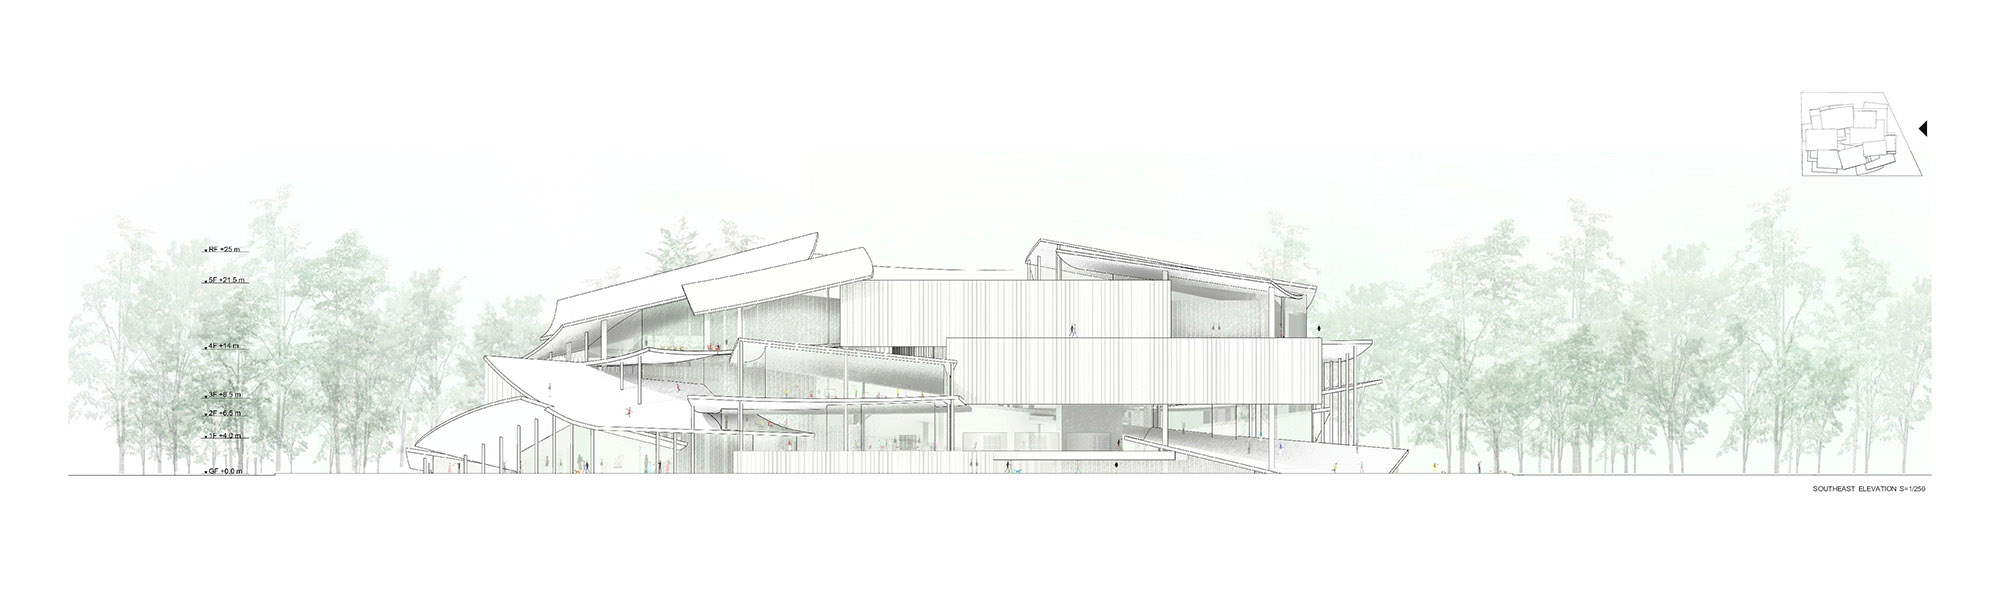 mm_new national gallery-ludwig museum design by SANAA_34